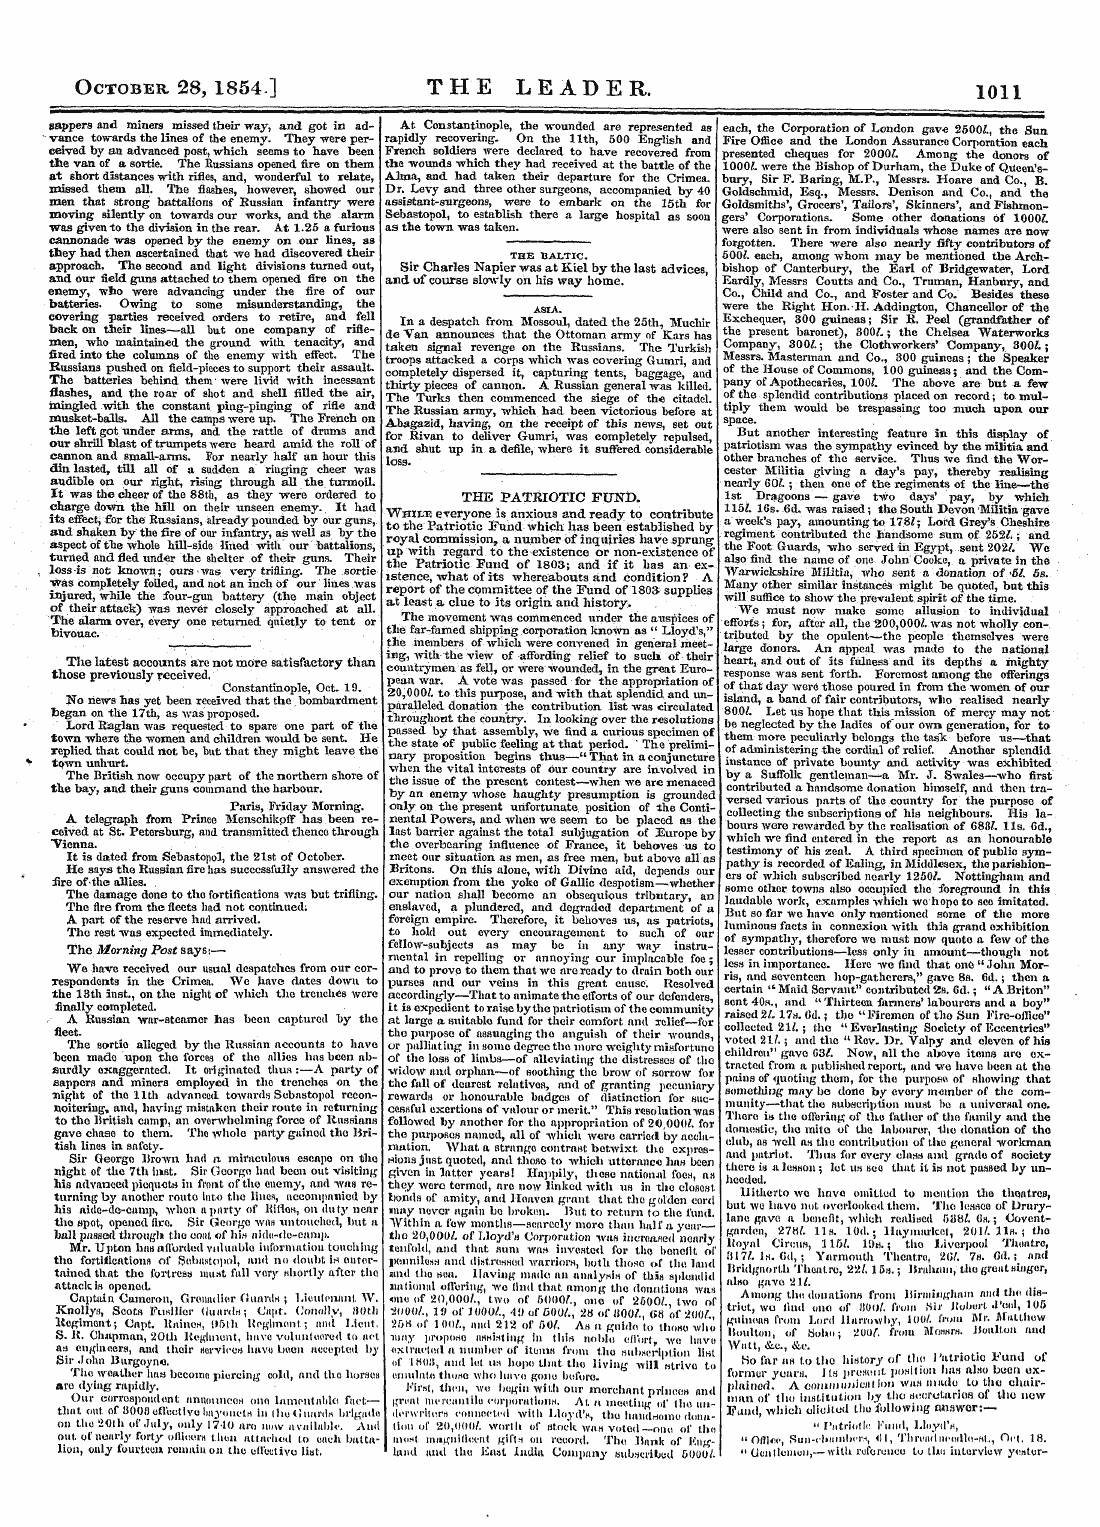 Leader (1850-1860): jS F Y, Country edition - October 28, 1854] The Leader. 1011